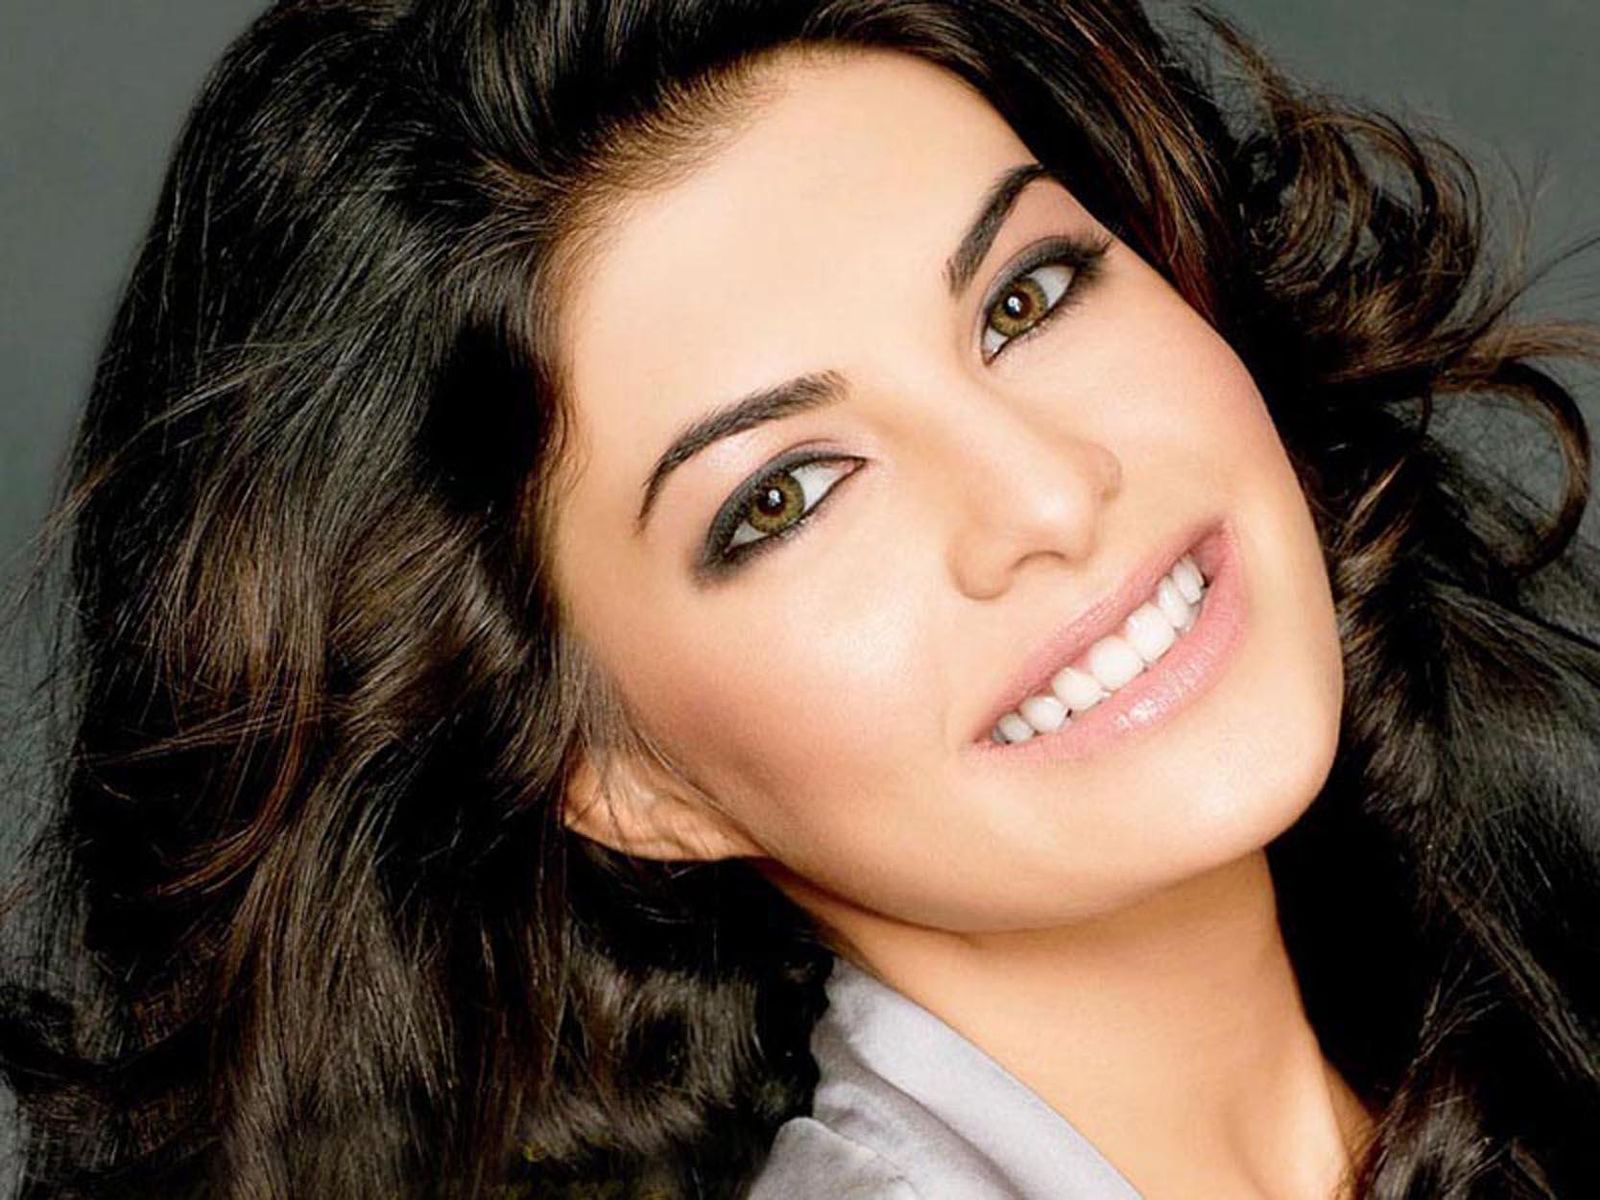 Jacqueline Fernandez to portray the role of a classical dancer in her next